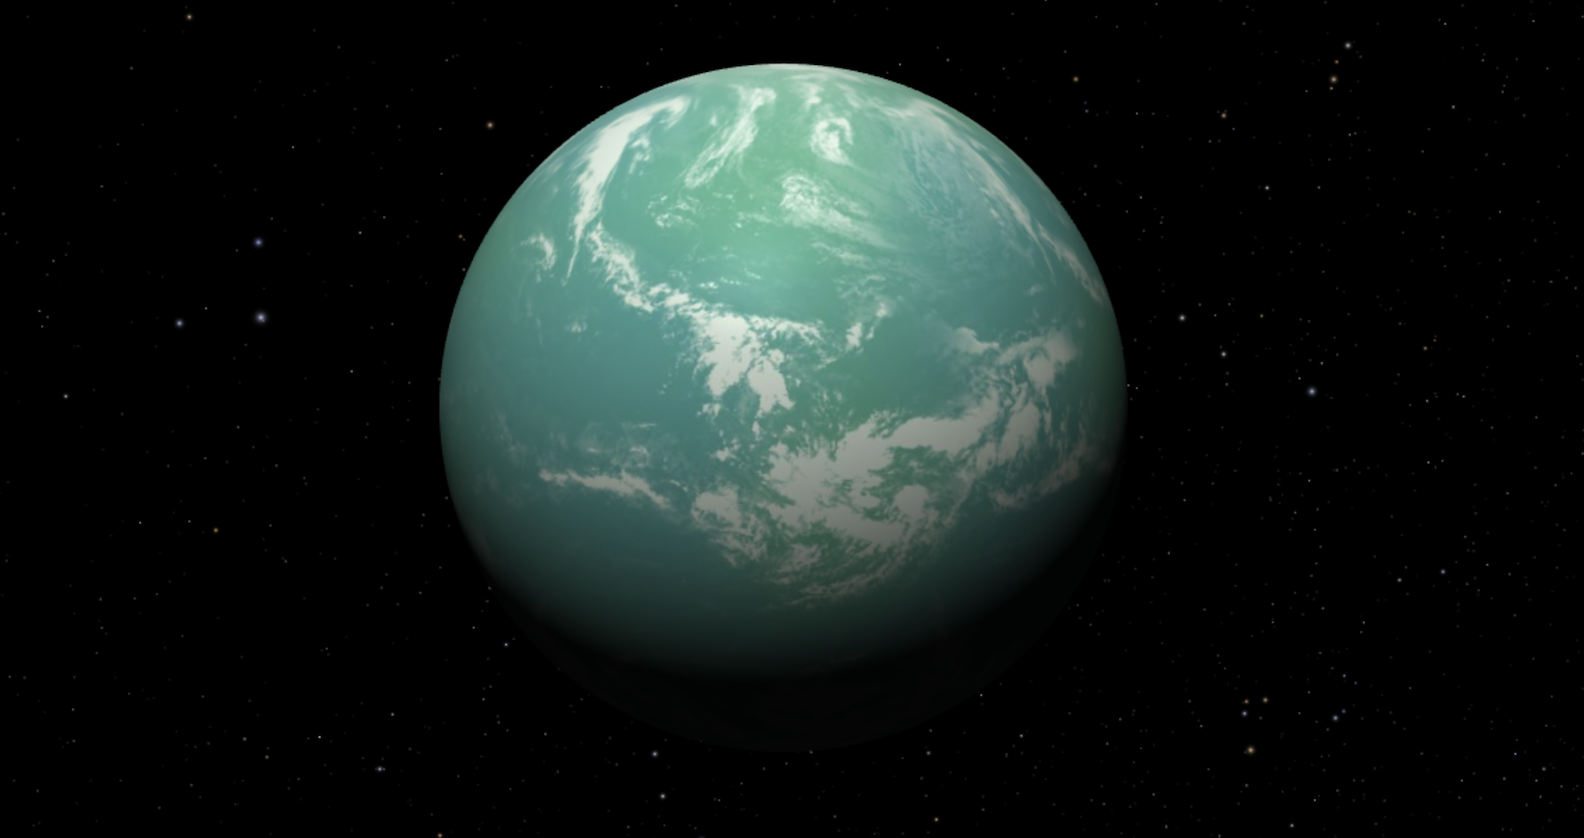 There are mysterious “super-Earths” all over the galaxy